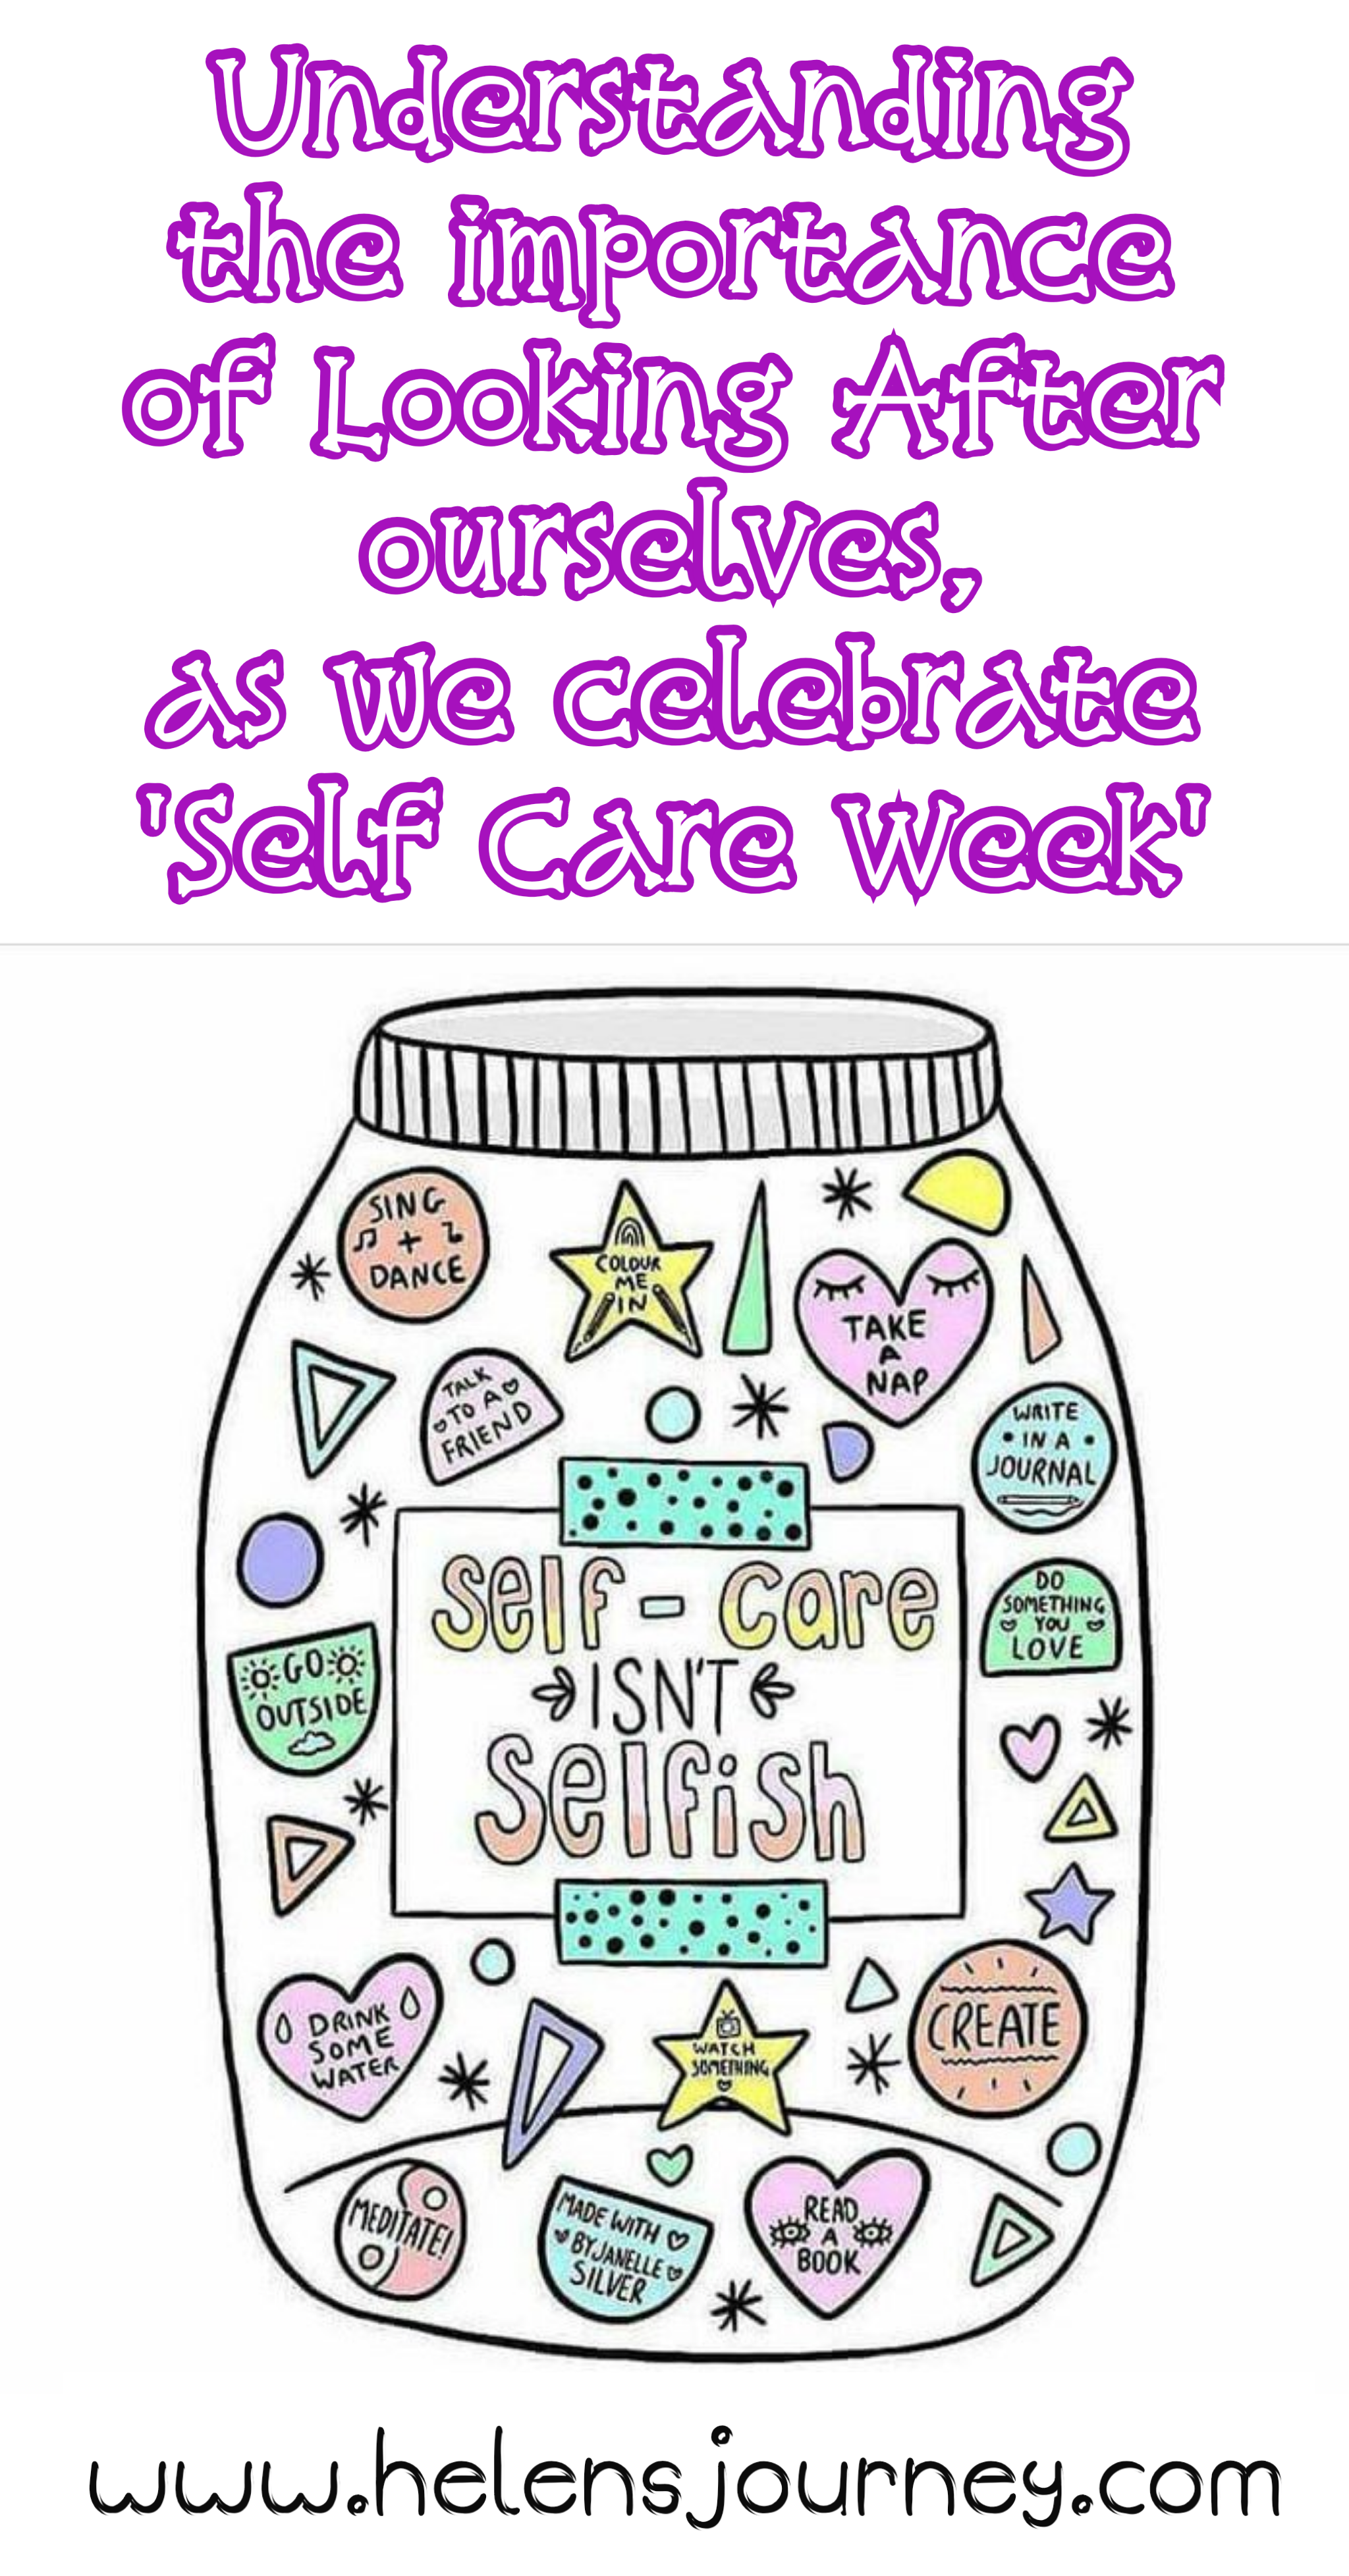 self-care isn't selfish. Understanding the importance of looking after yourself as we celebrate self-care week